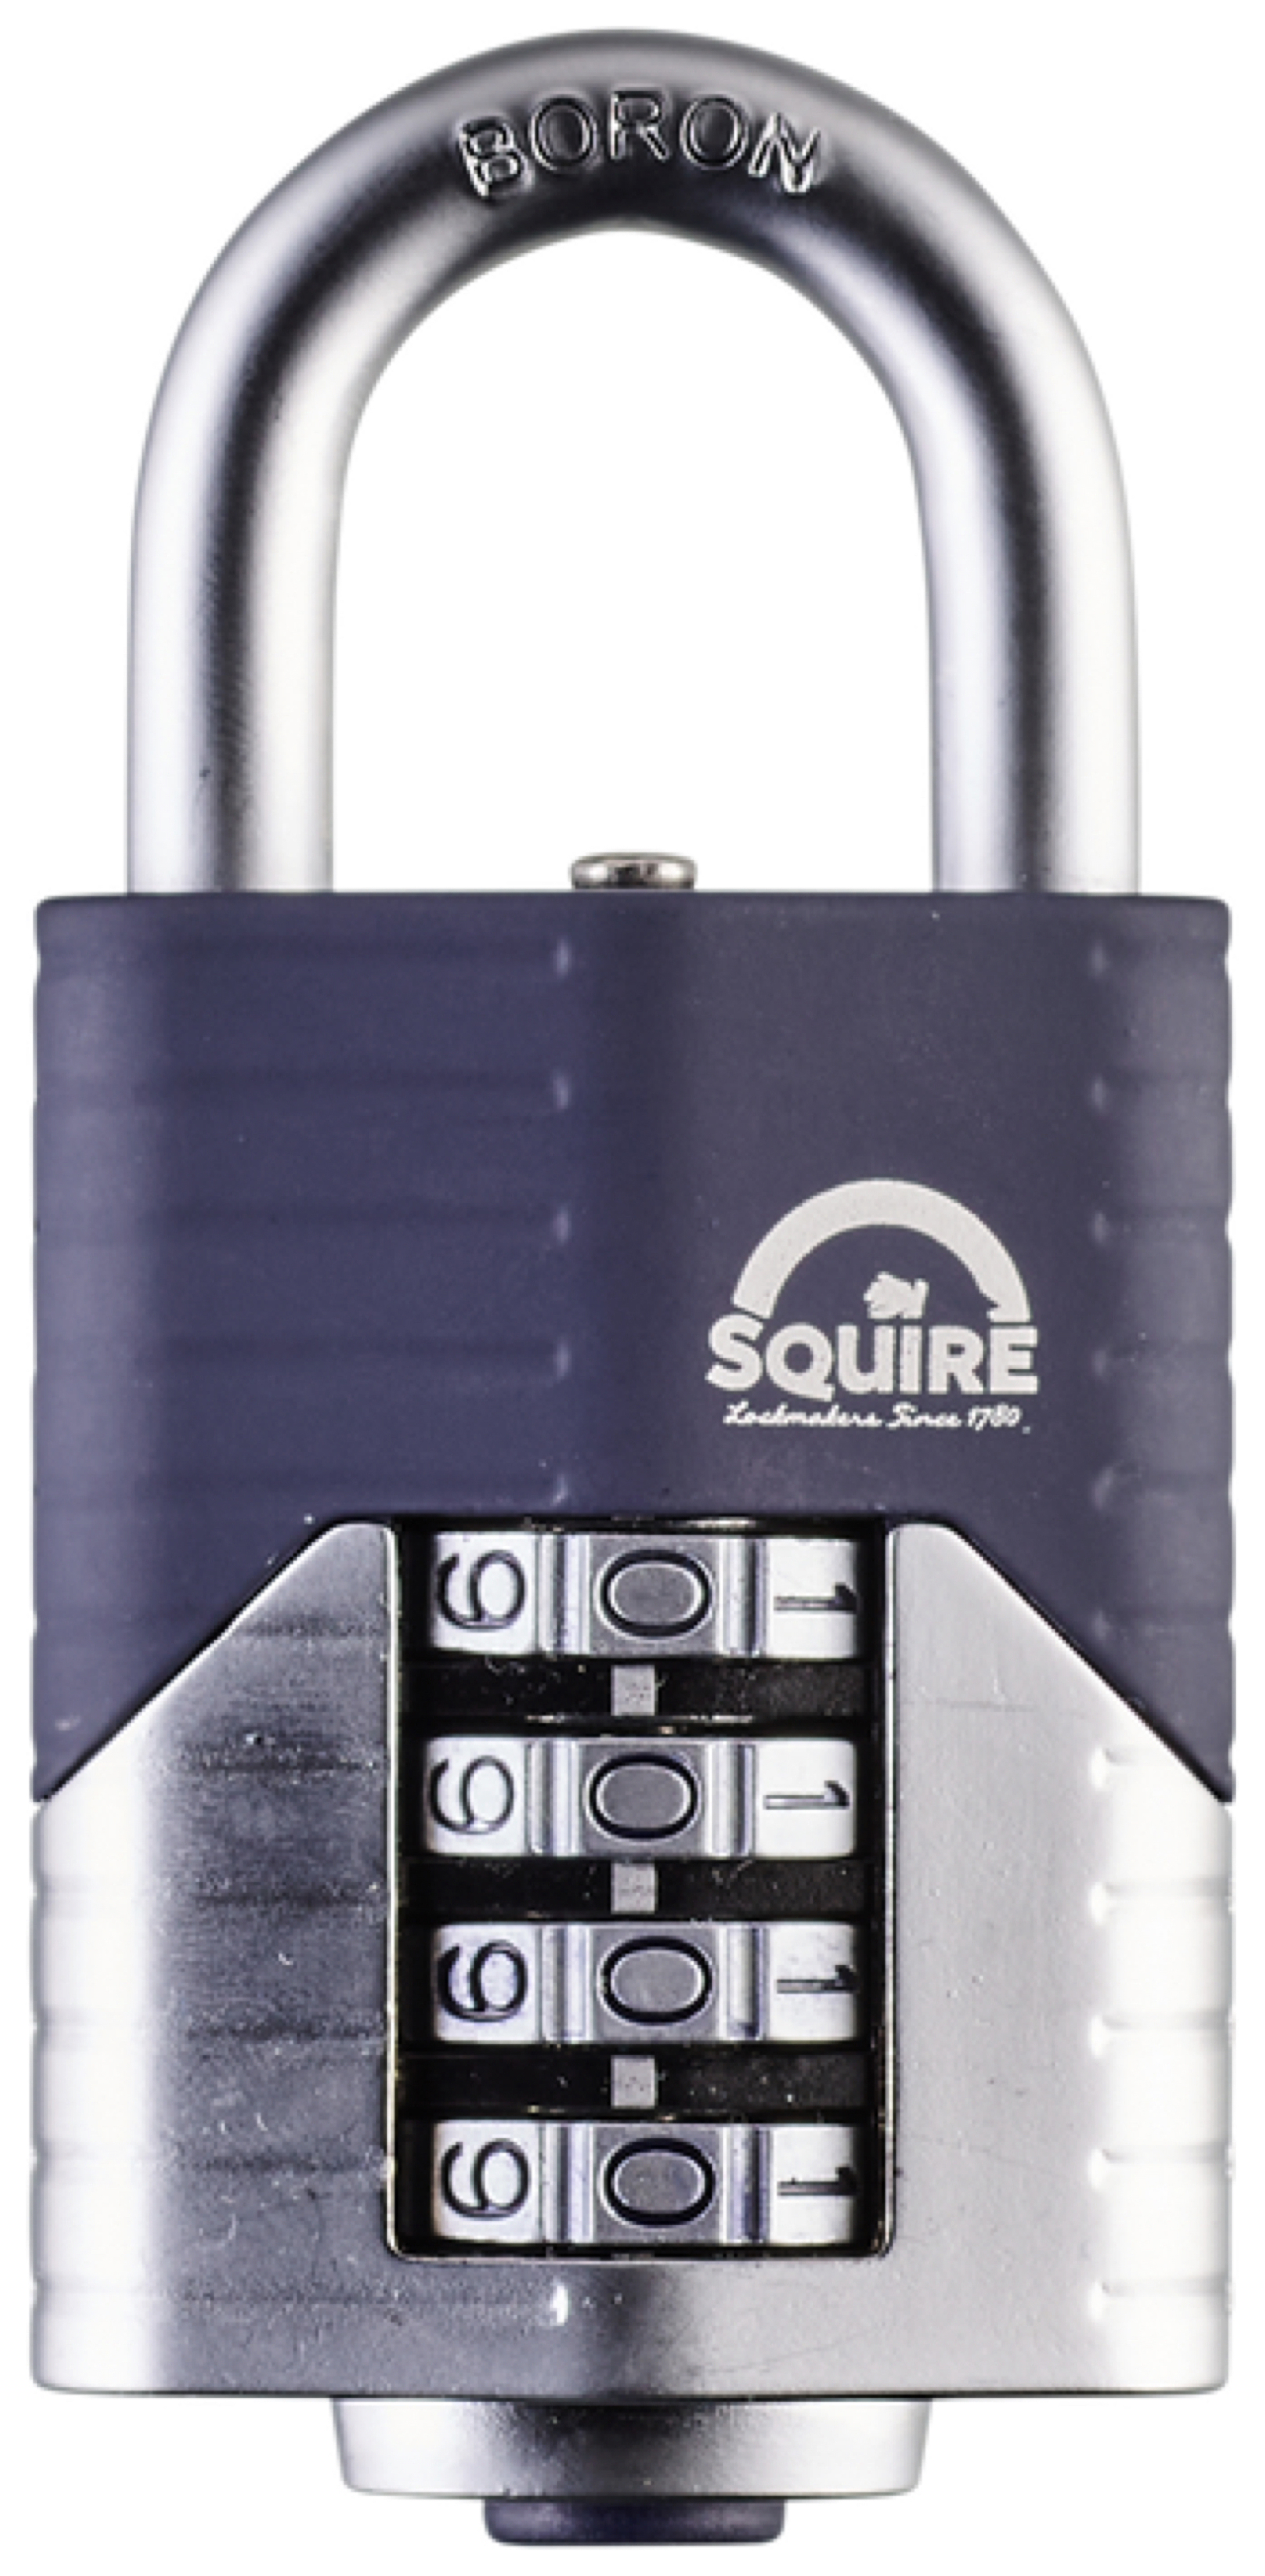 Squire Combination Padlock with Boron Shackle - 50mm